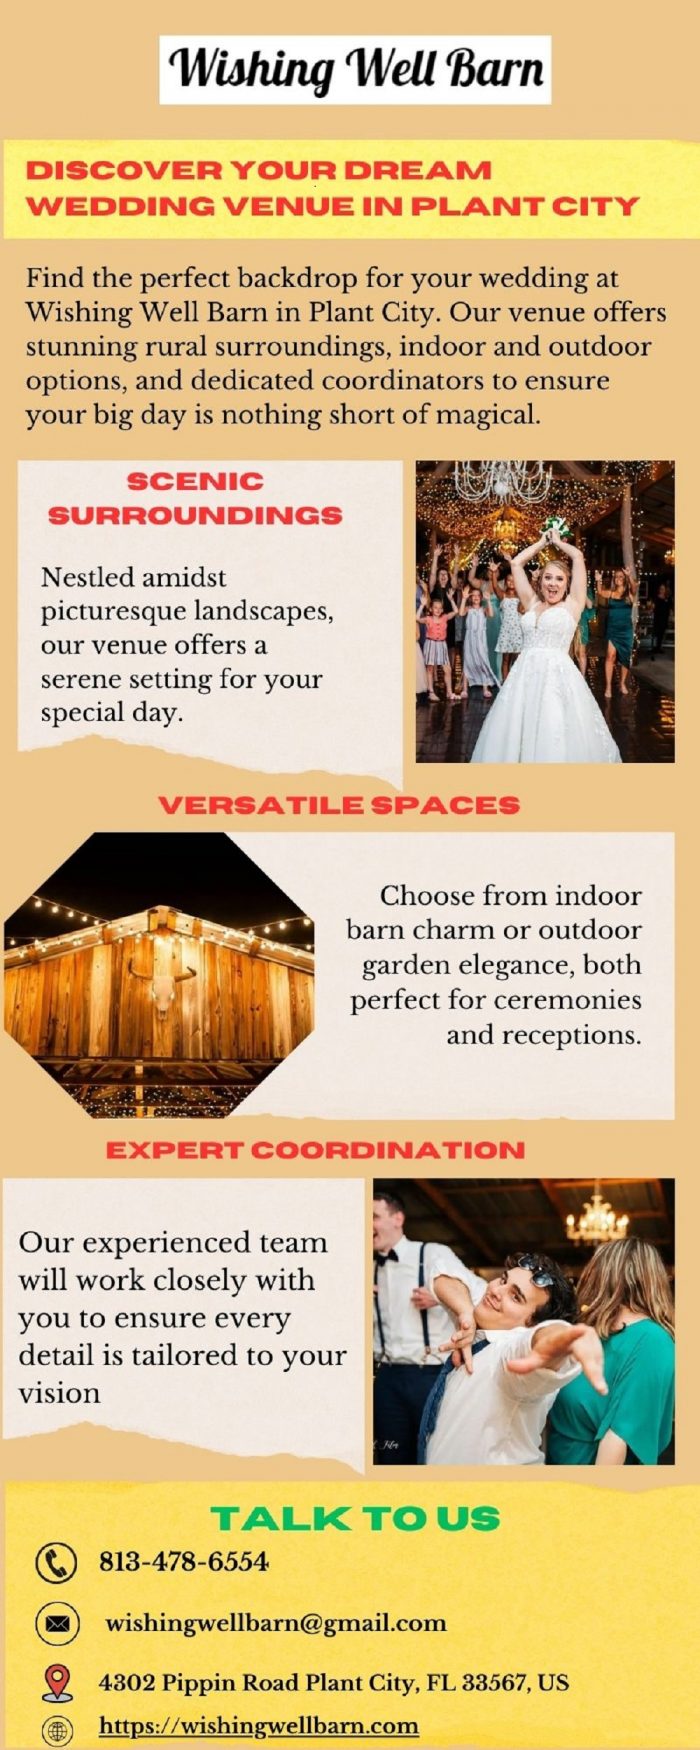 Your Dream Wedding Venue in Plant City: Wishing Well Barn